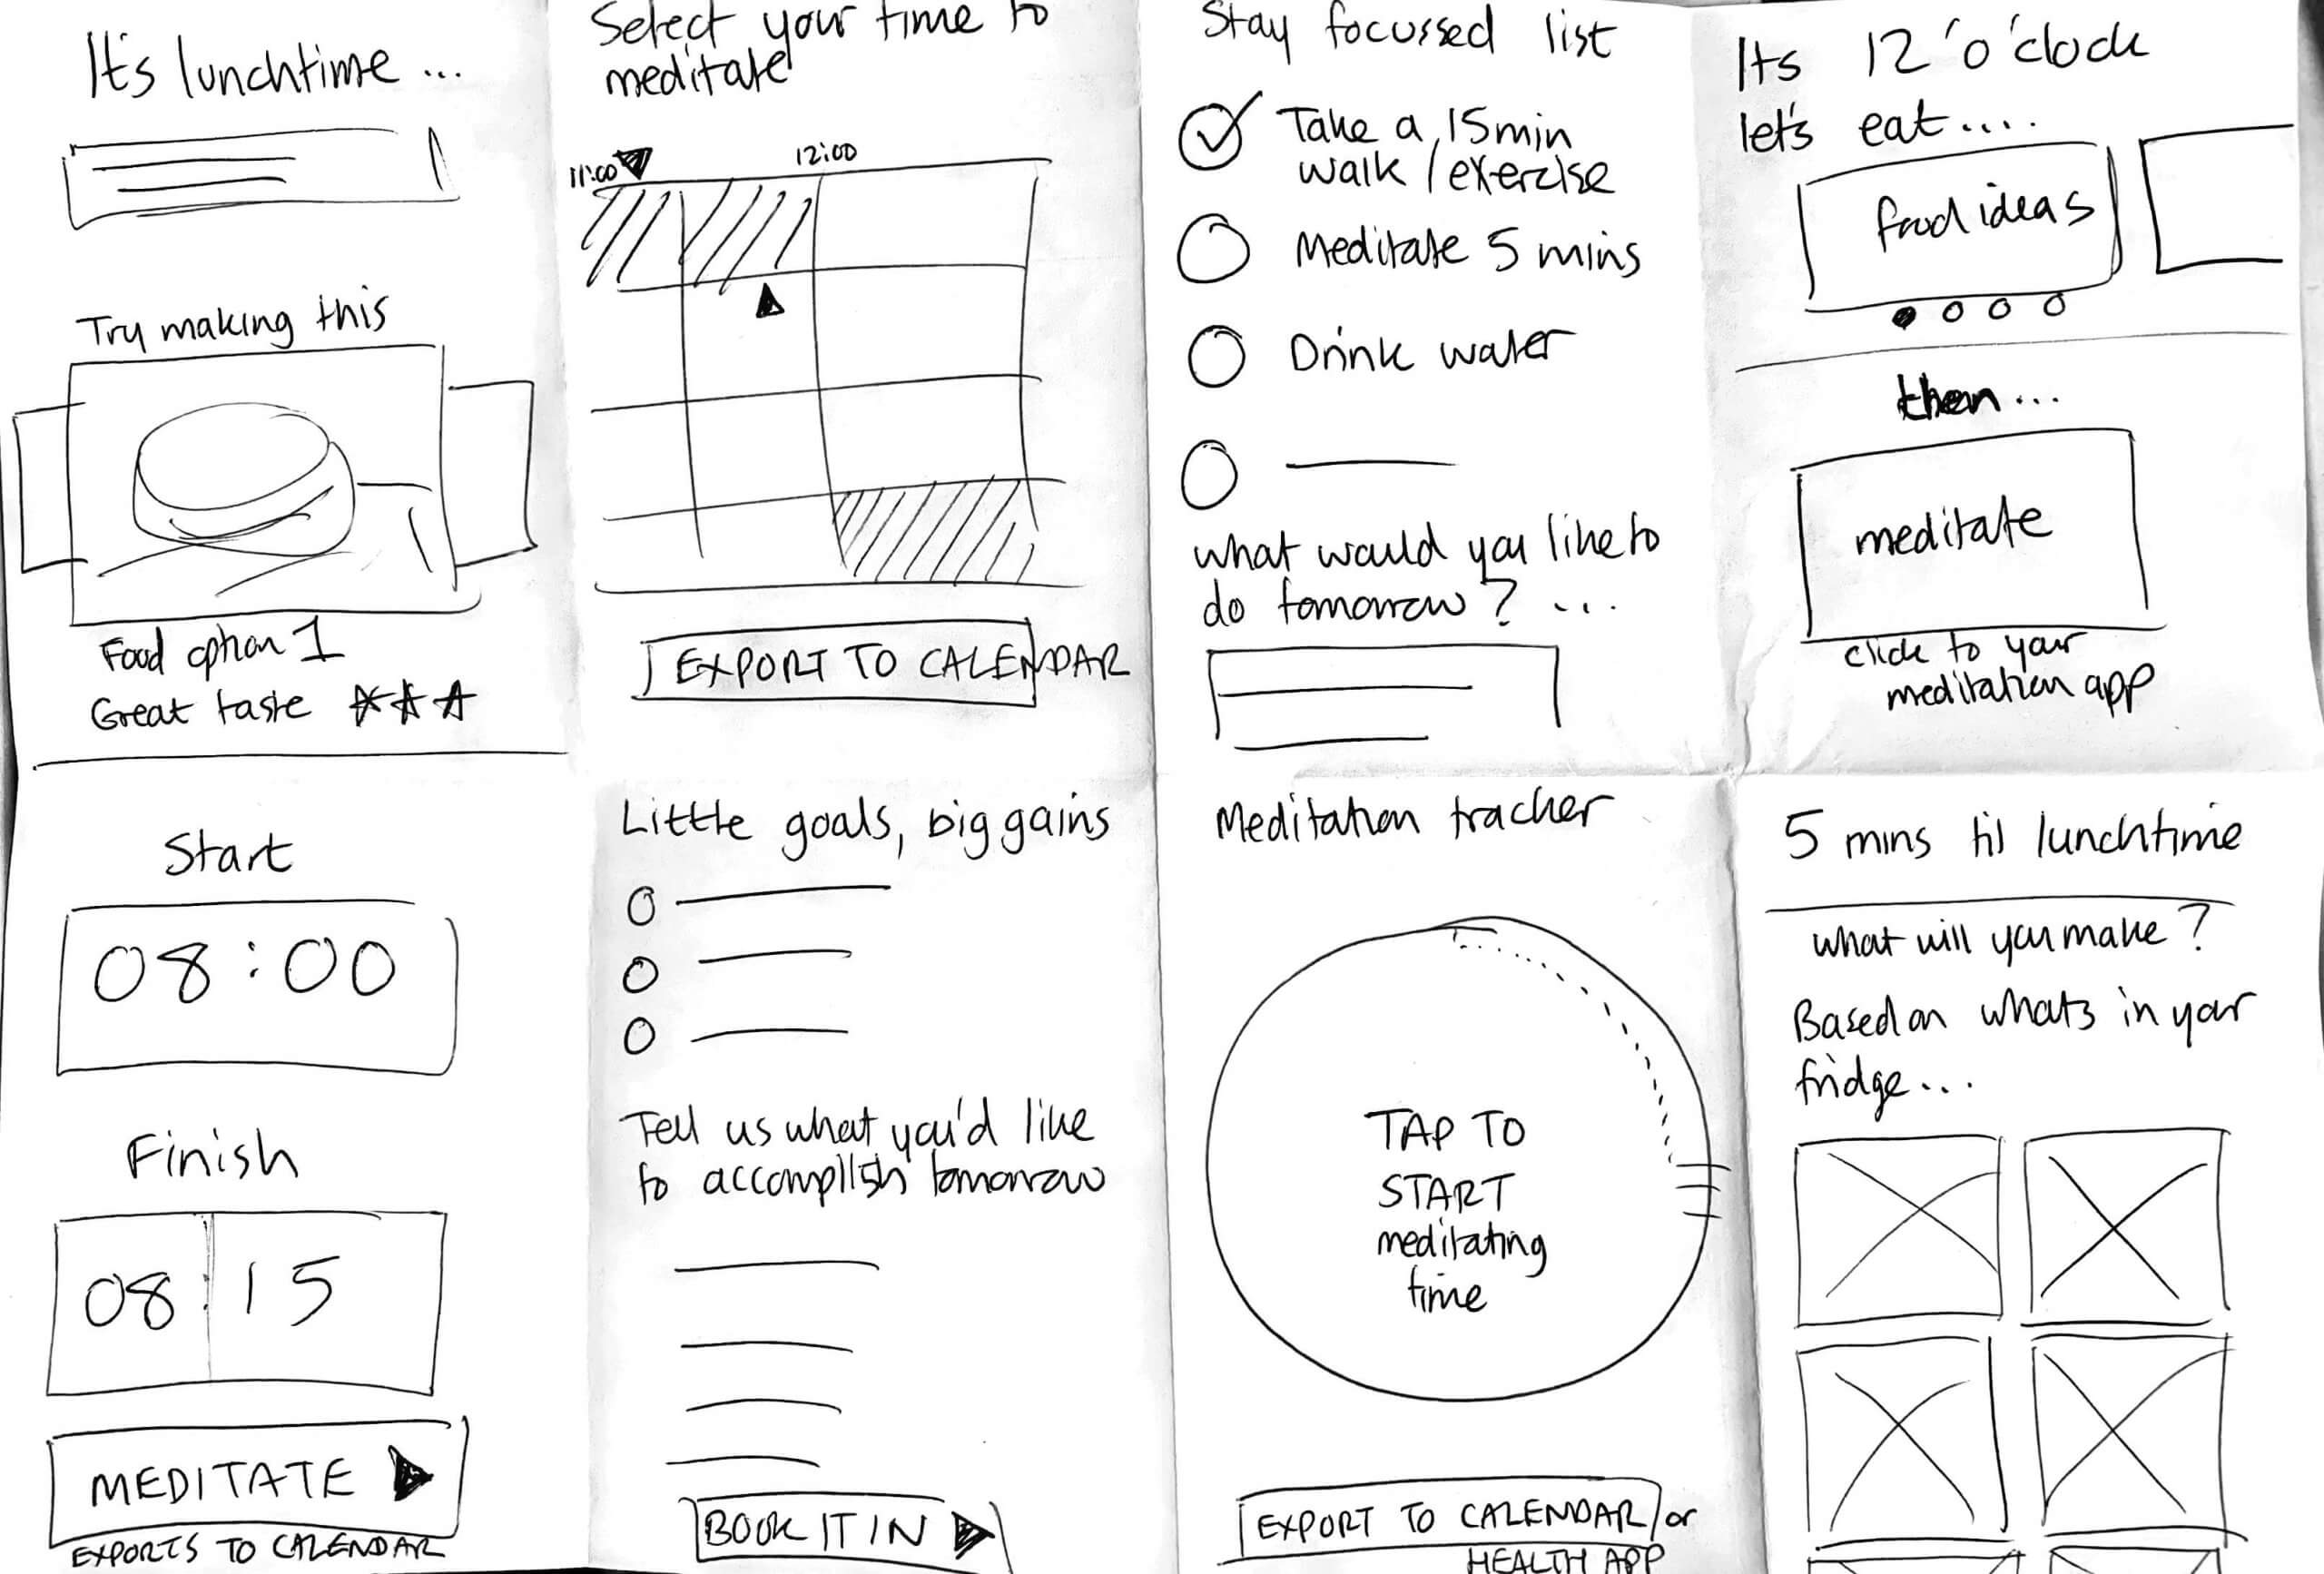 UX Concepts & Sketching